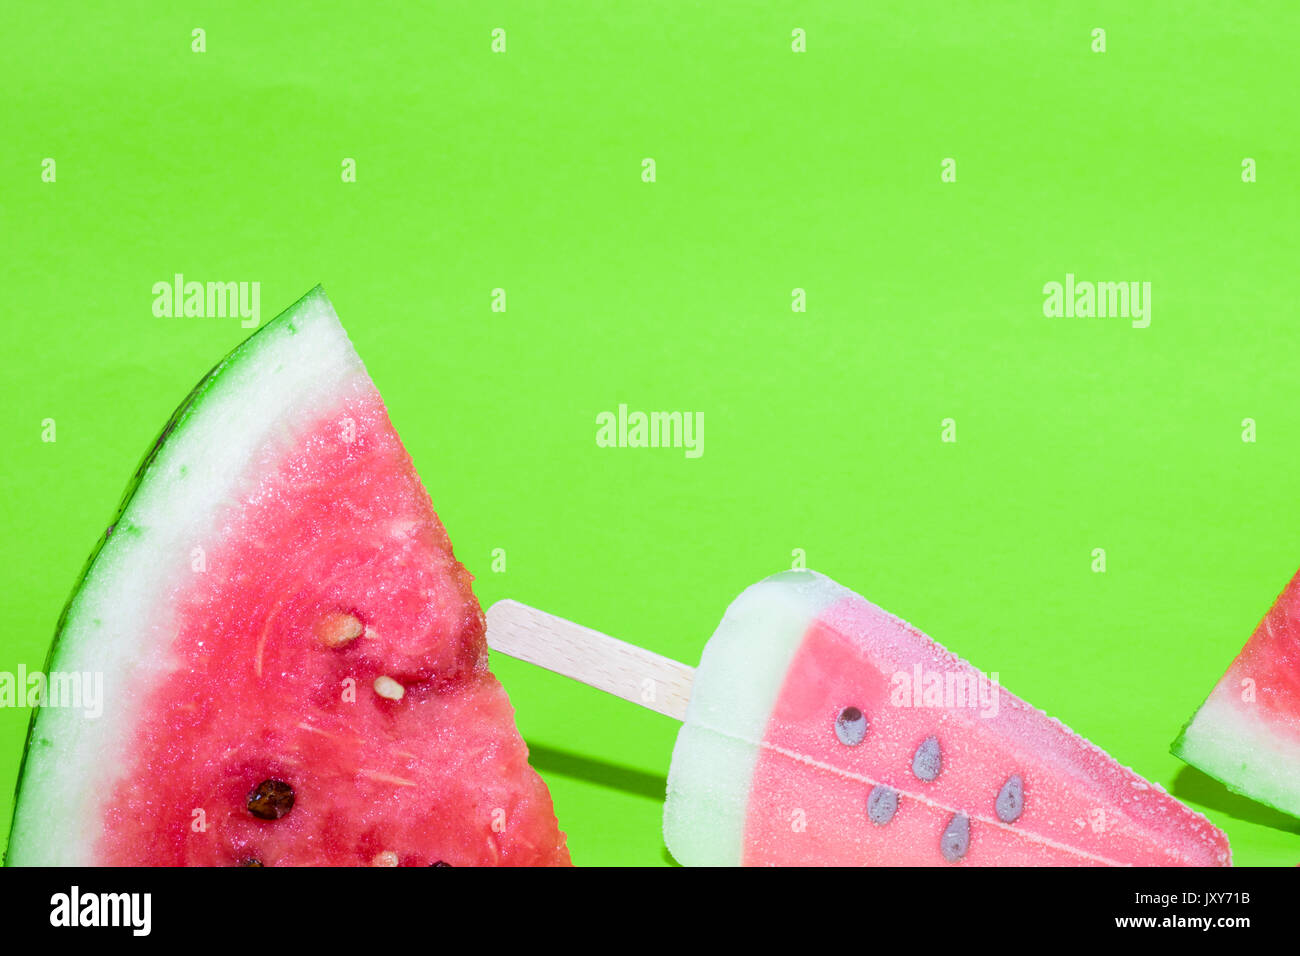 Watermelon slice and ice cream on bright green background Stock Photo